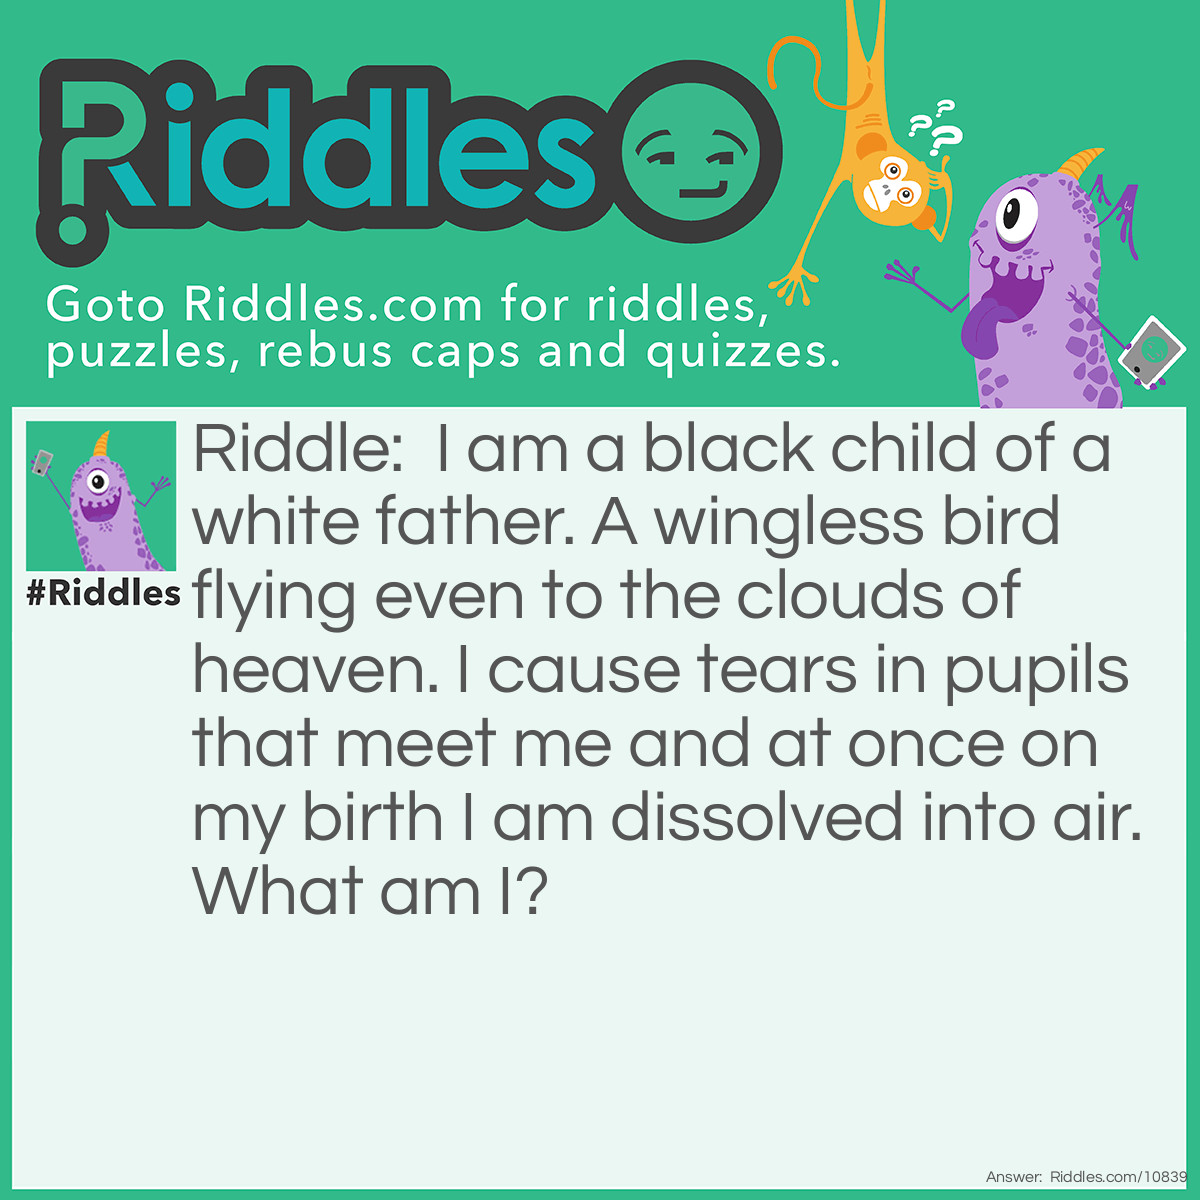 Riddle: I am a black child of a white father. A wingless bird flying even to the clouds of heaven. I cause tears in pupils that meet me and at once on my birth I am dissolved into air. What am I? Answer: Smoke.